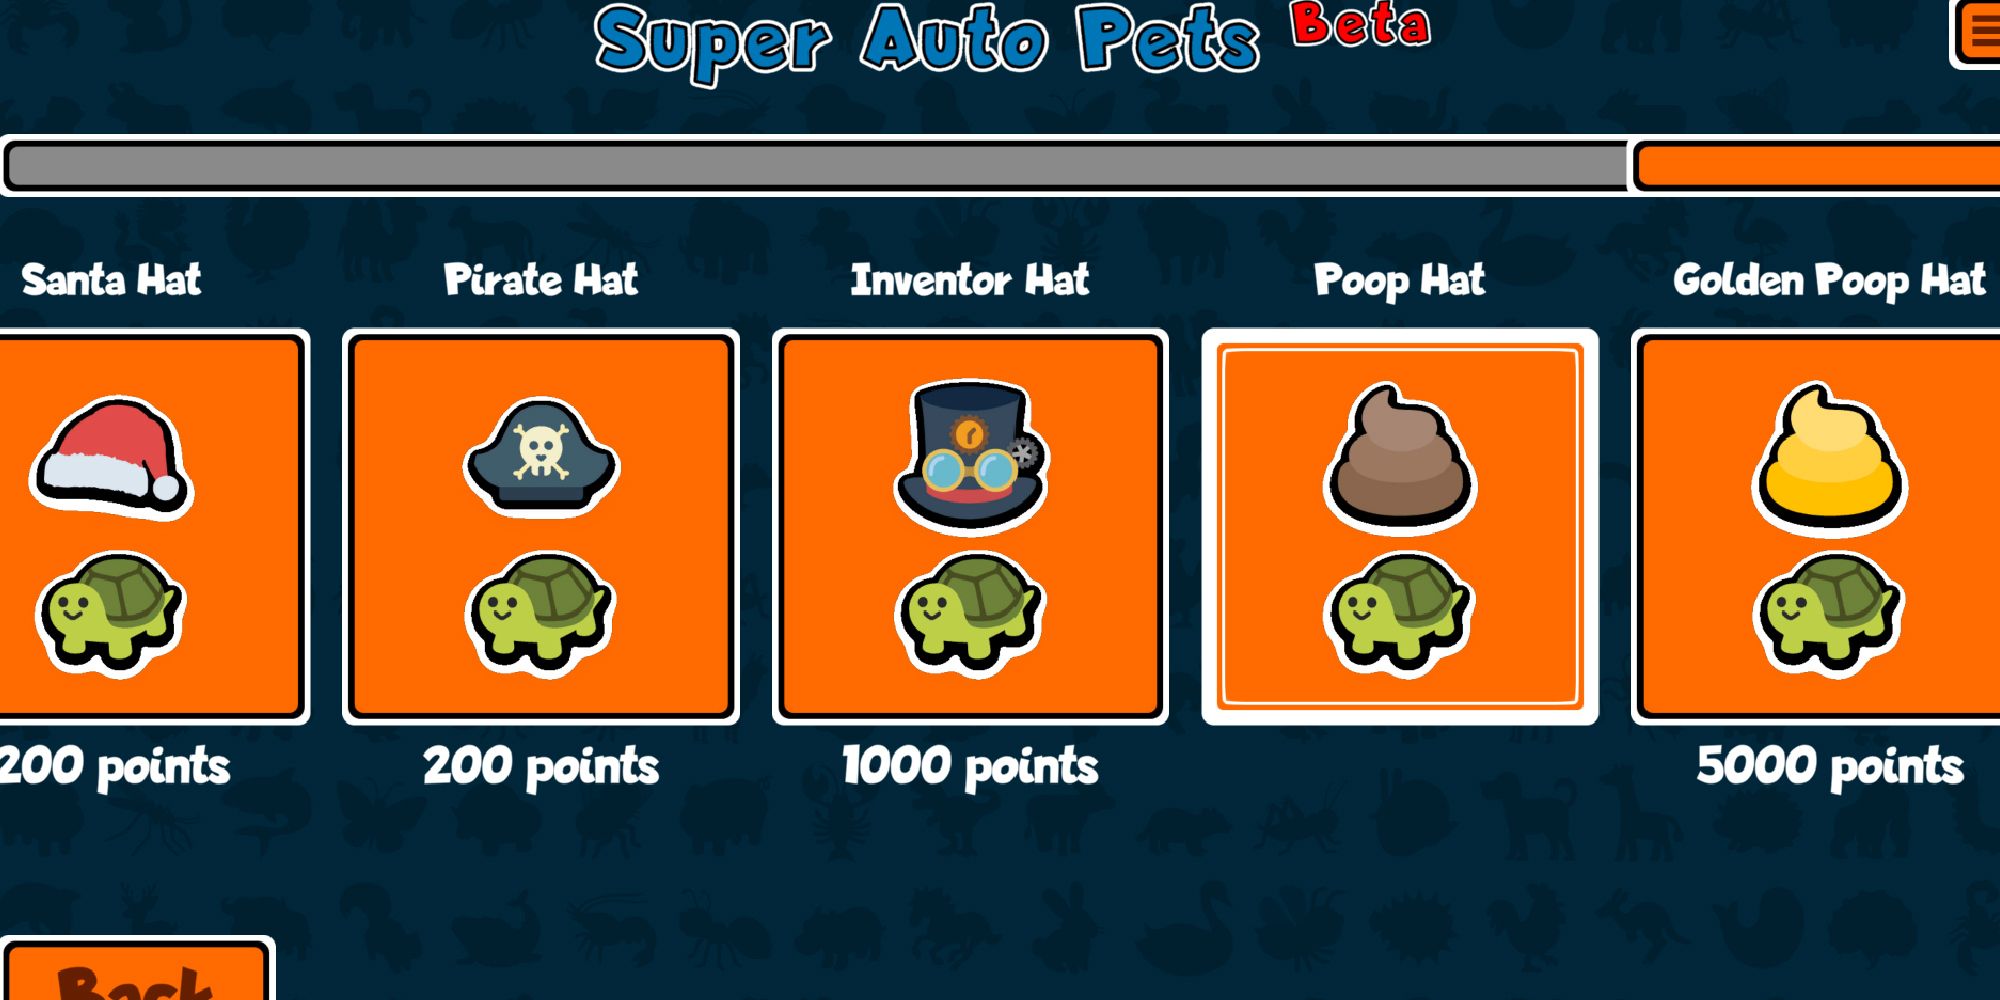 Super Auto Pets - An Example Of Some Hats Players Can Buy With Points